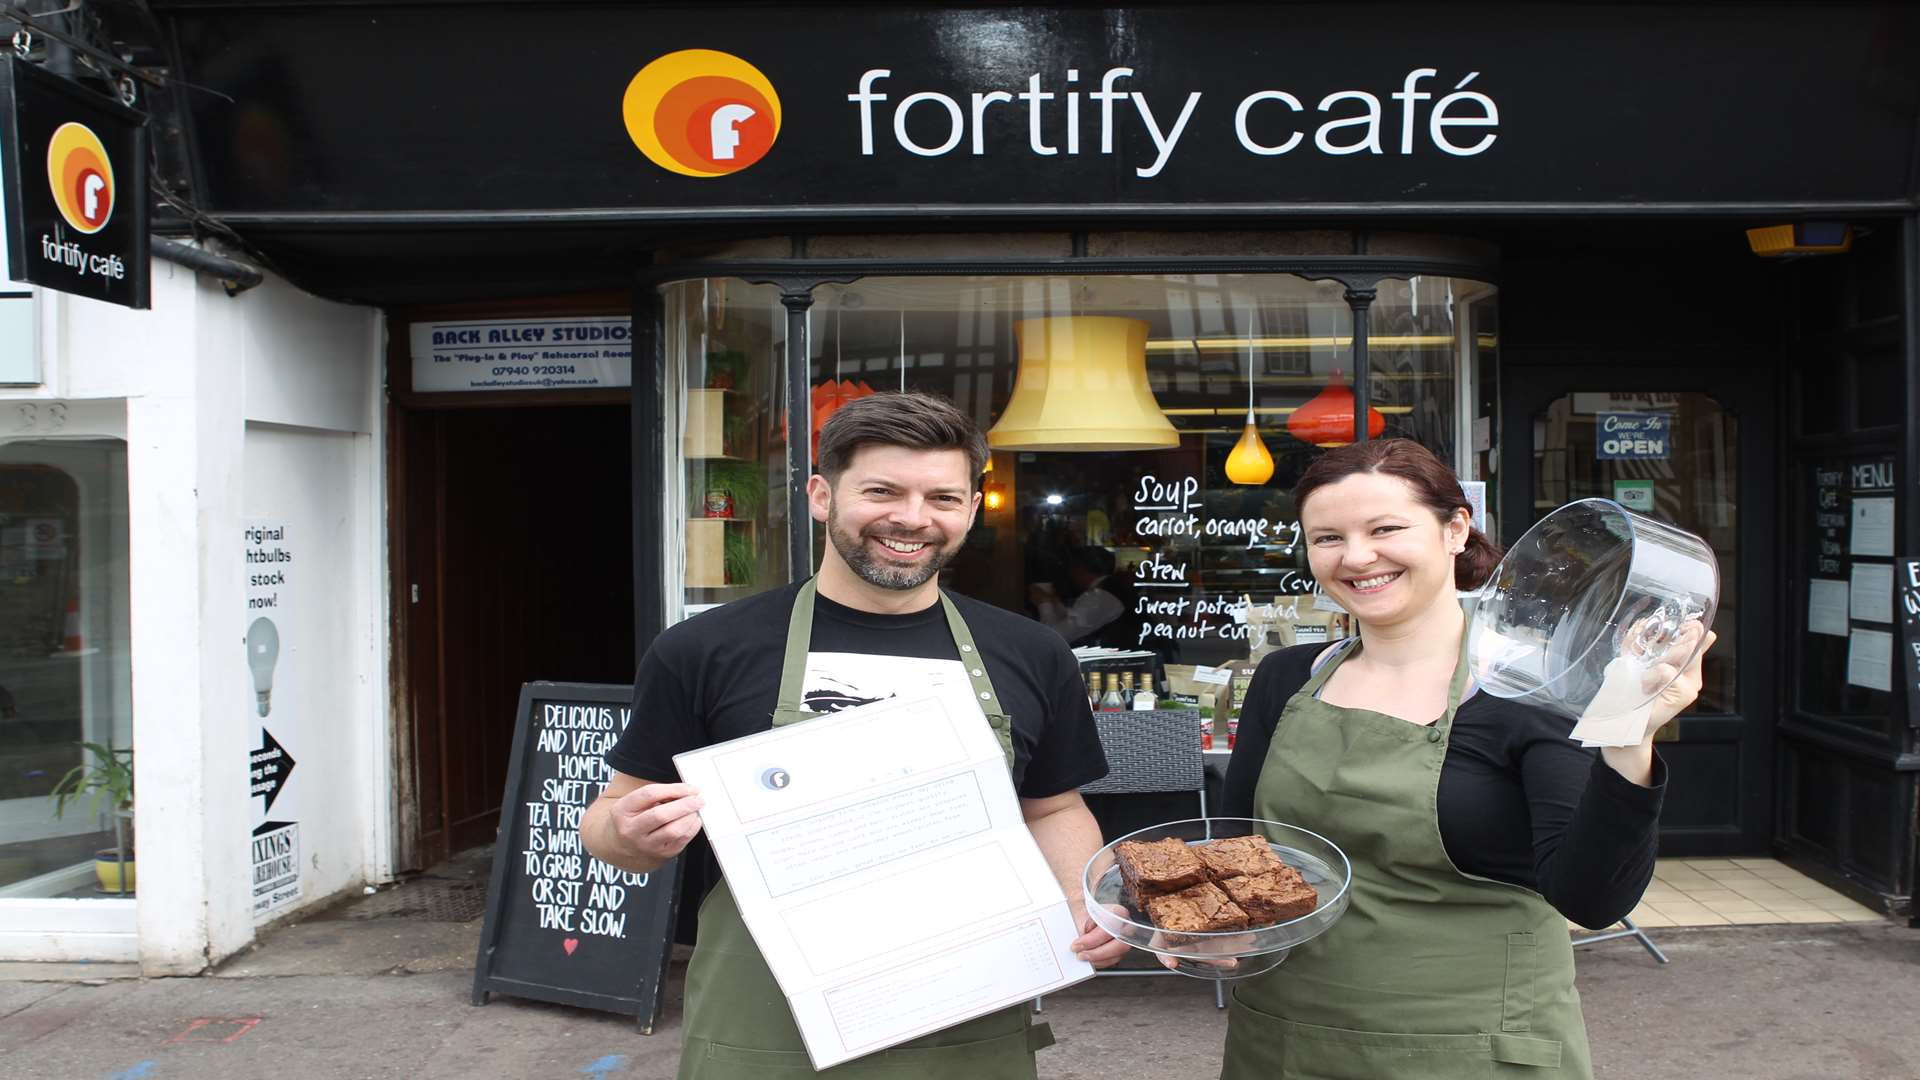 From left, James Hooper and Joanna Duda Cazas, front of house, celebrate receiving a Trip Advisor certificate of excellence outside Fortify Café